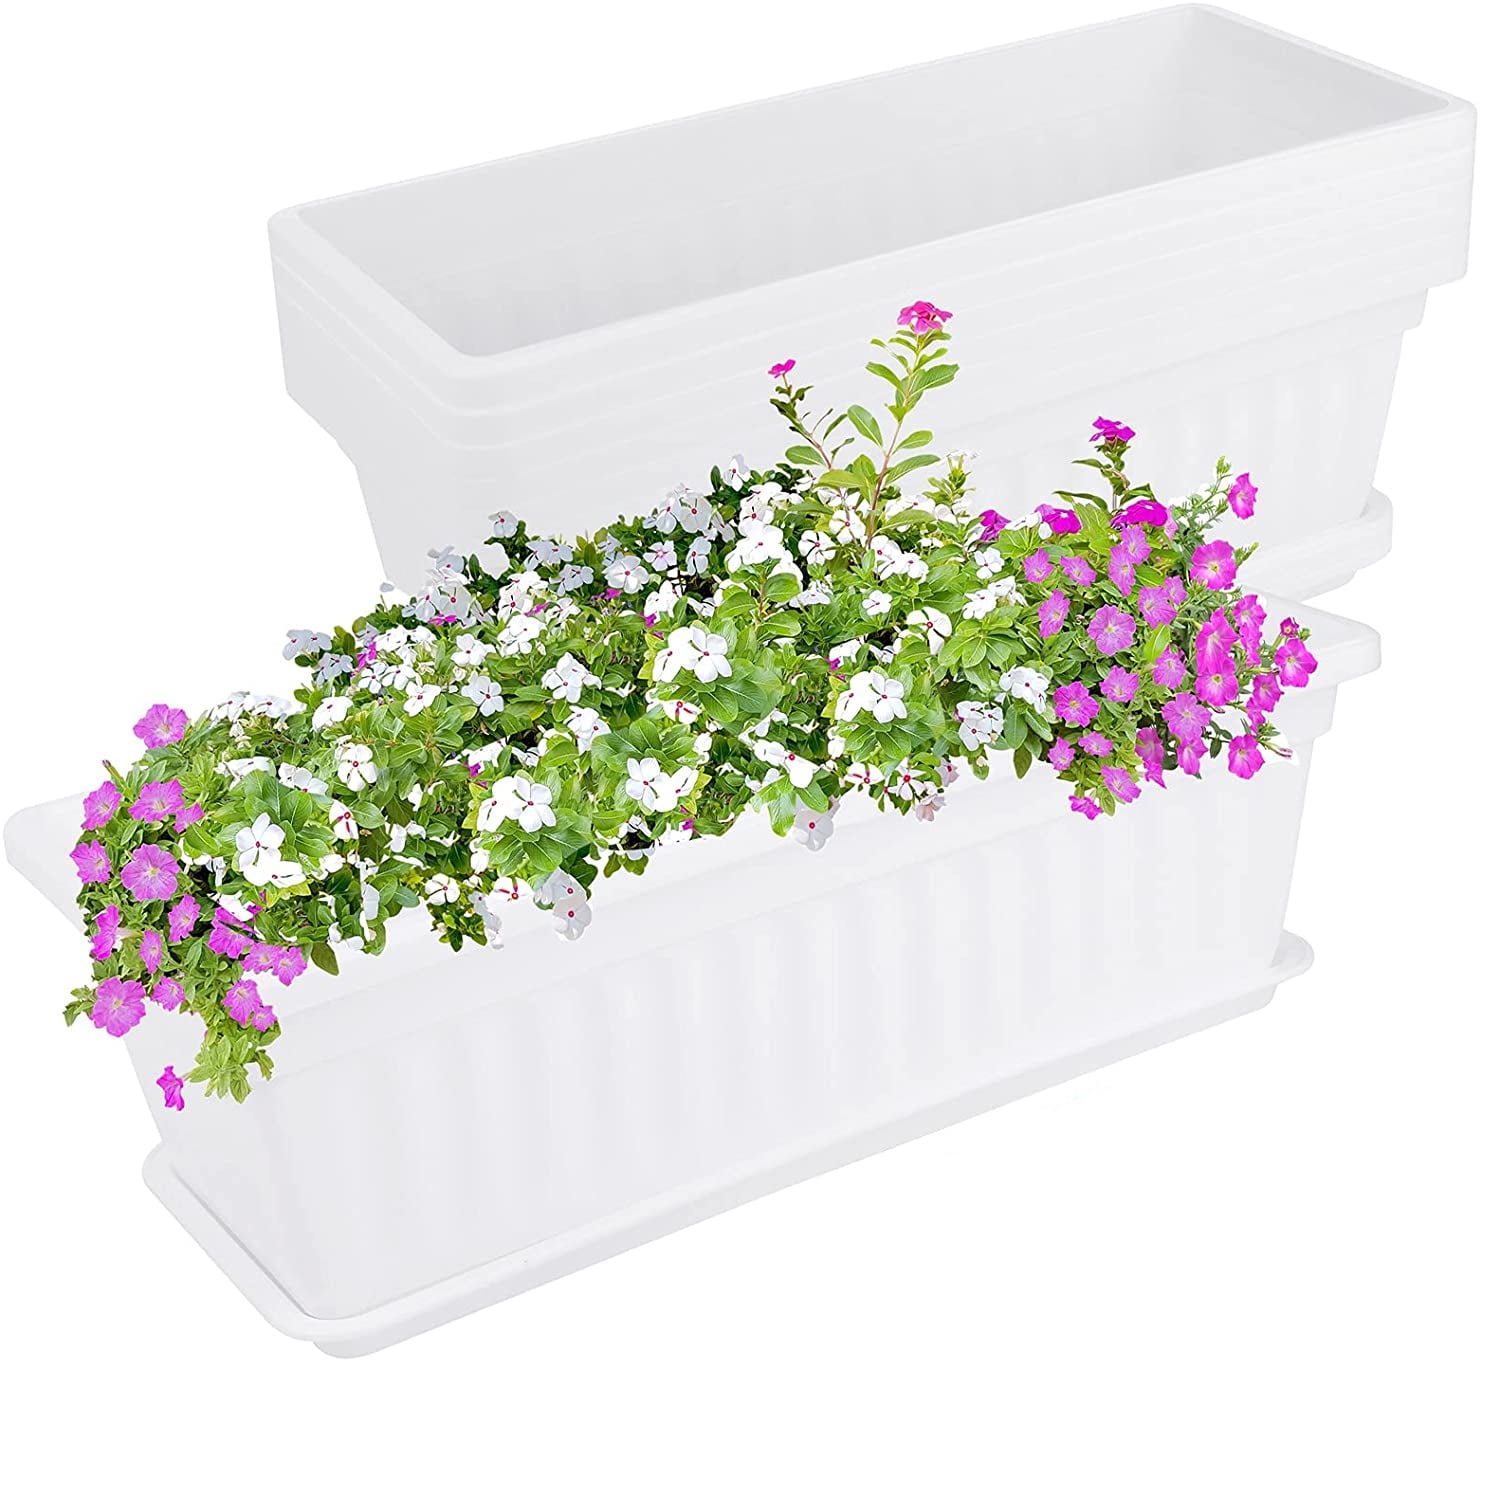 17 Inch Plastic Thicken Planters with Trays - Window Planter Box for Outdoor Indoor Vegetables, Flowers and Plants (1 Pack White) - Walmart.com